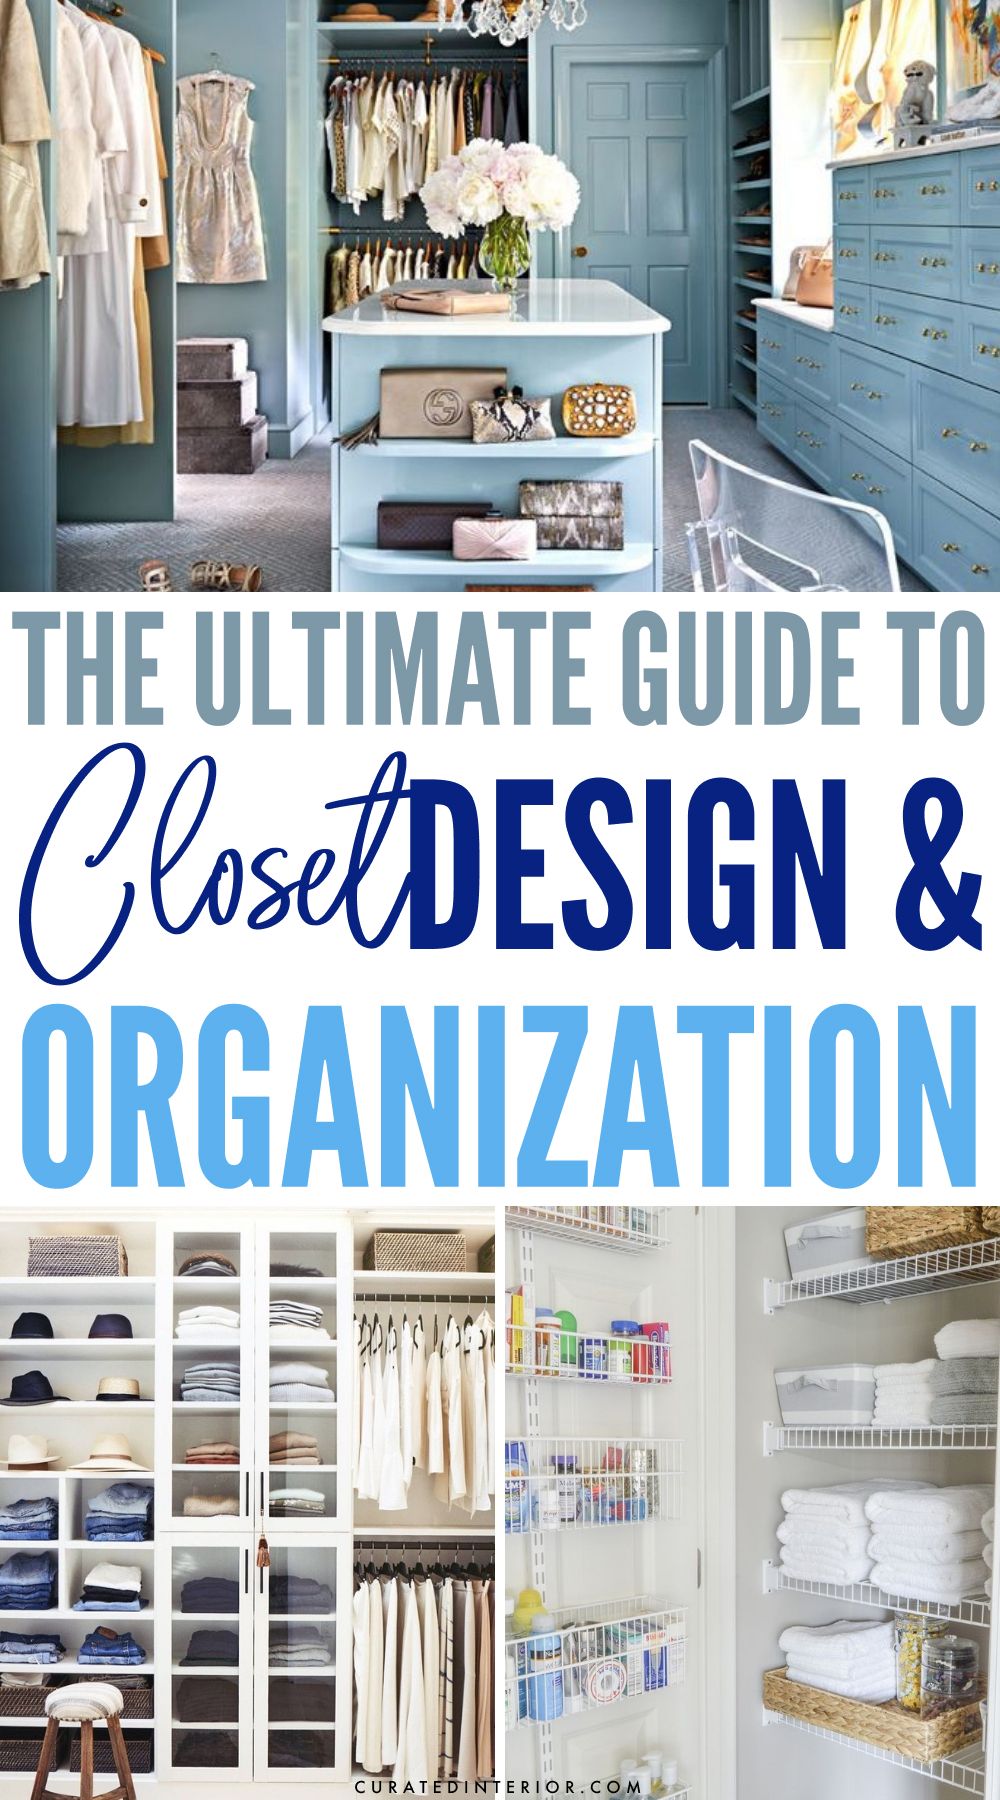 The ultimate guide to closet design and organization. Get the closet of your dreams!